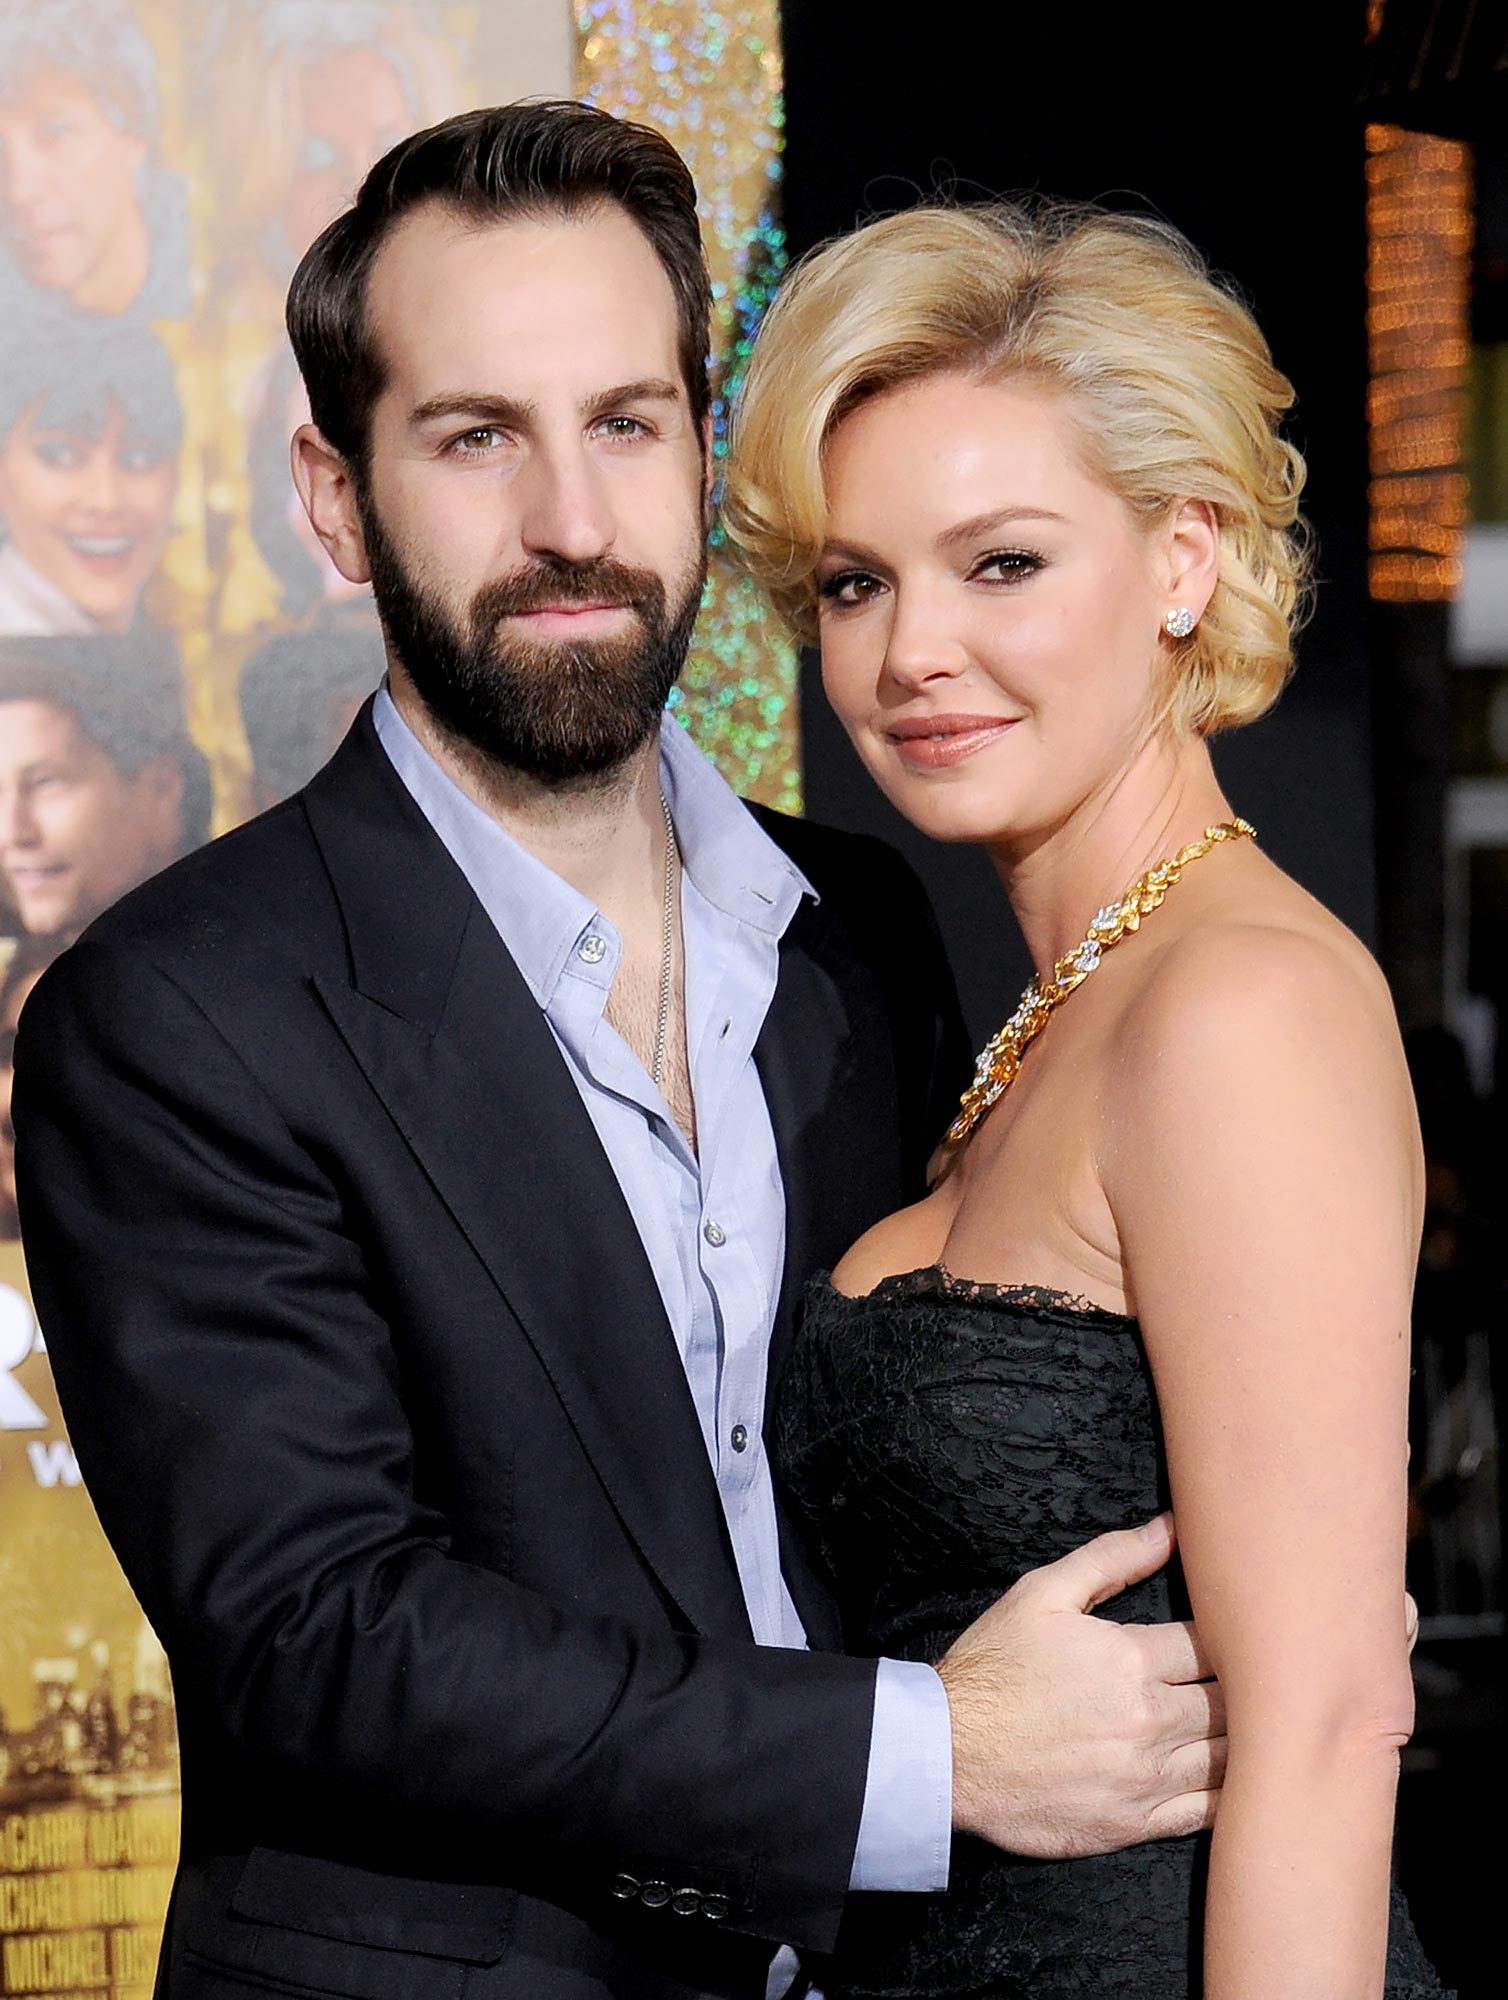 Katherine Heigl and Josh Kelley: A Timeline of Their Relationship